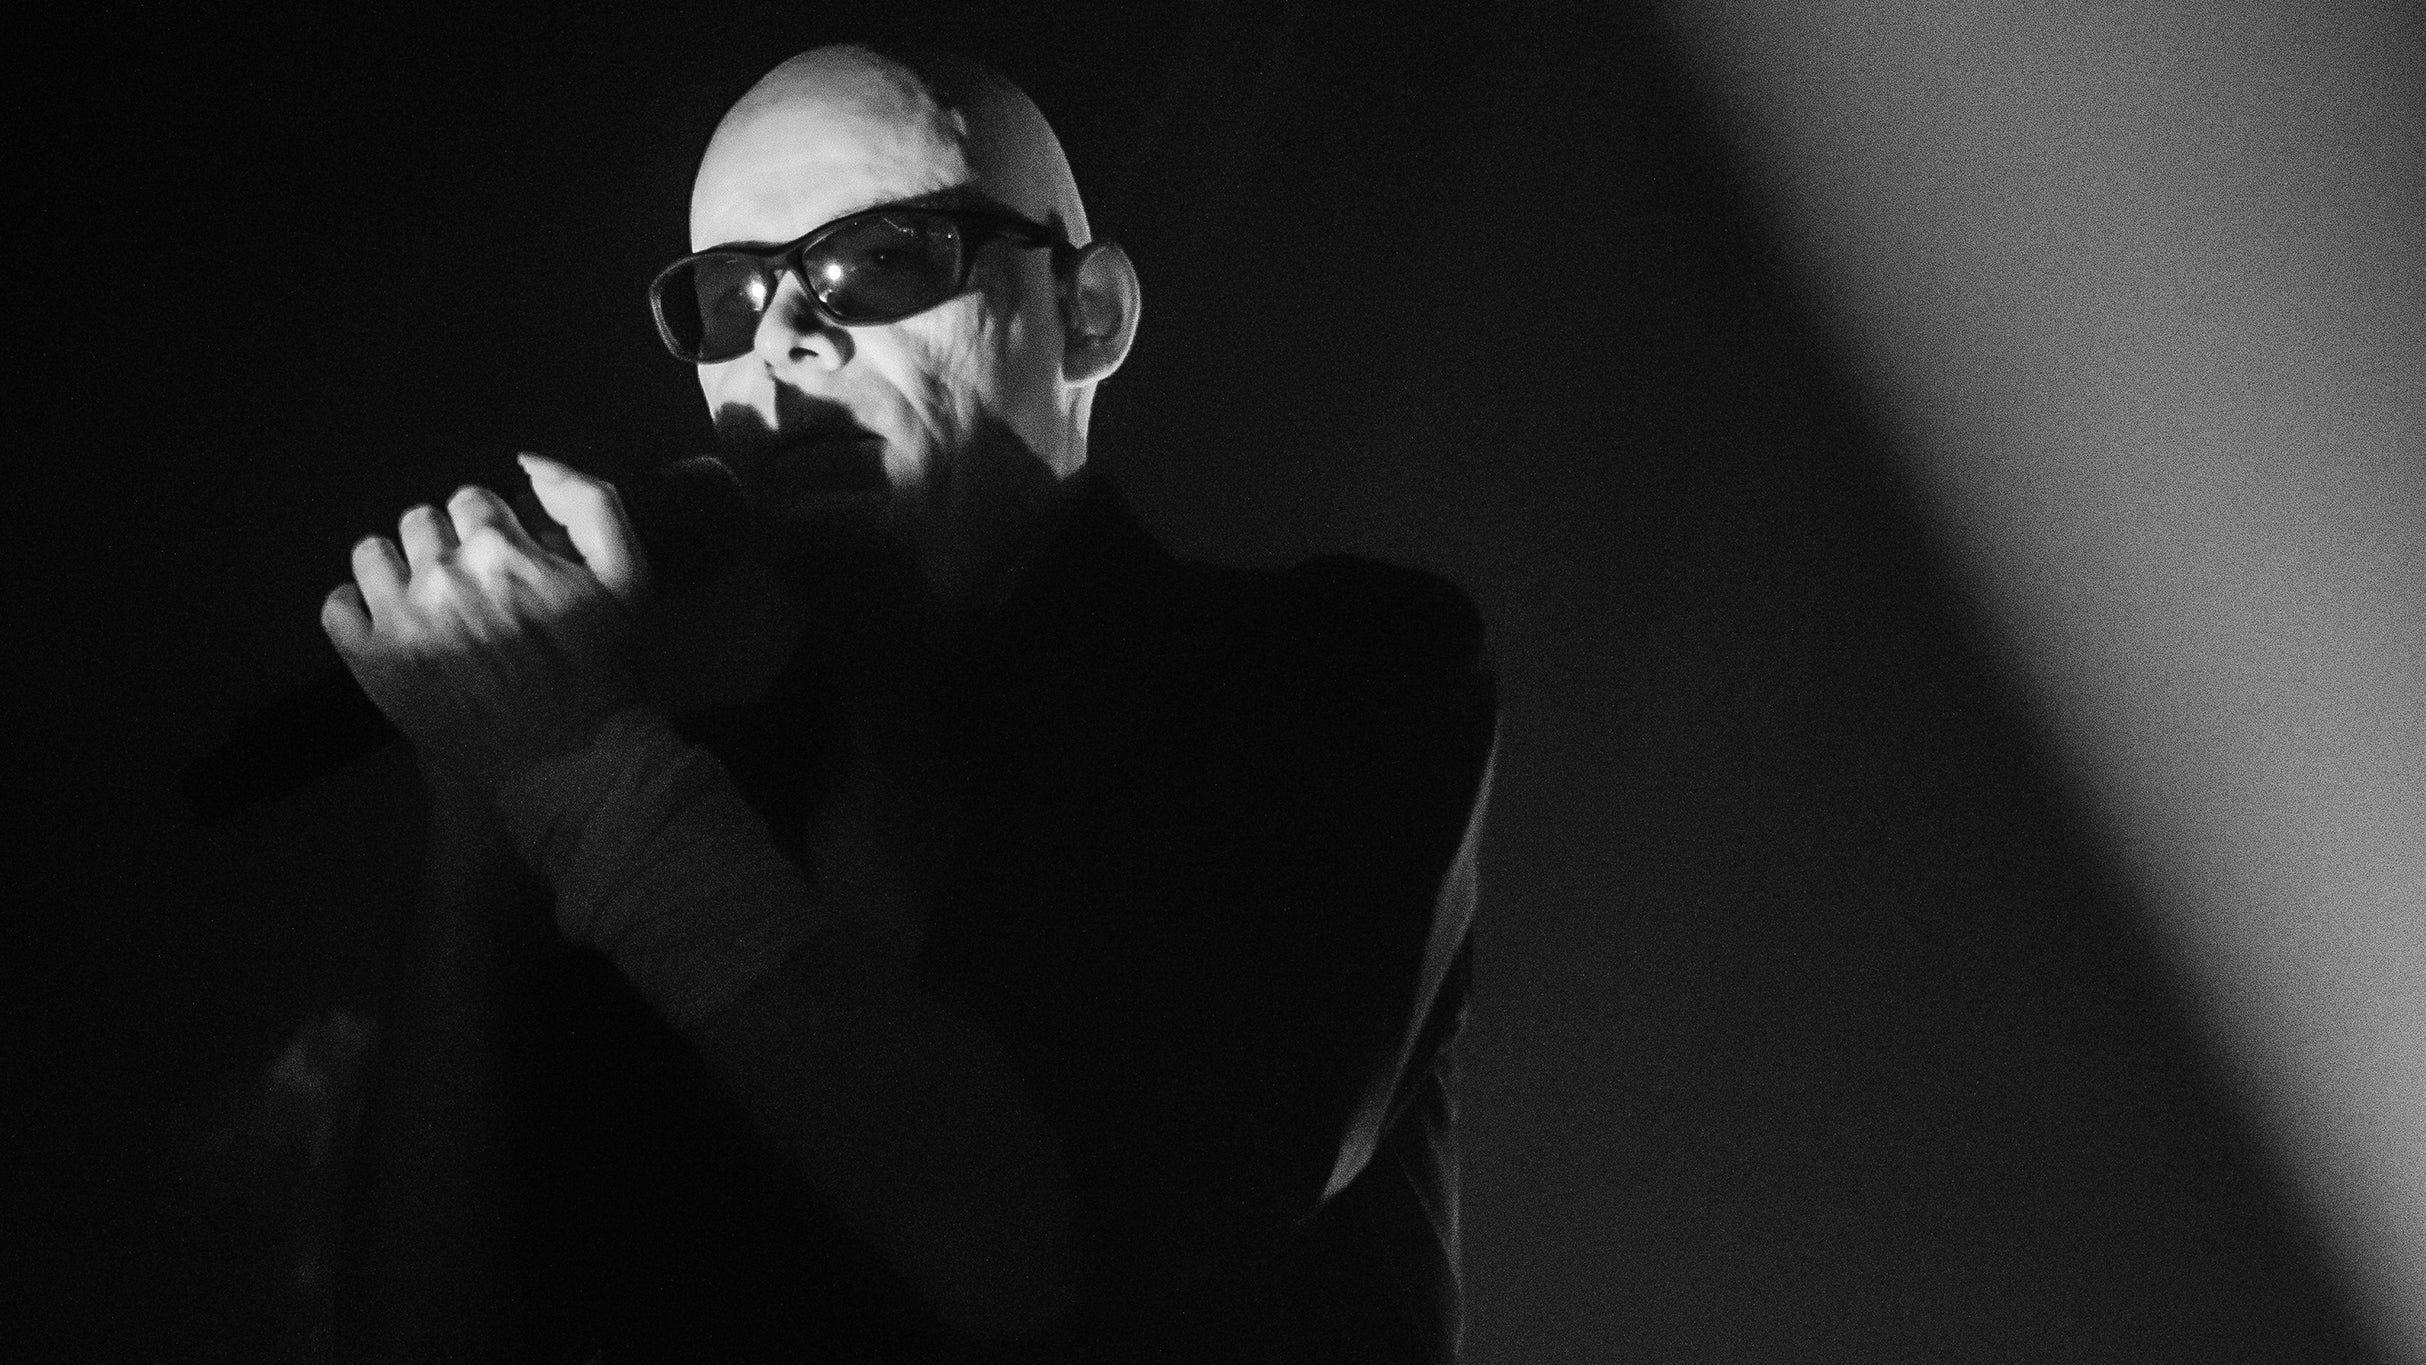 The Sisters of Mercy presale password for advance tickets in Philadelphia